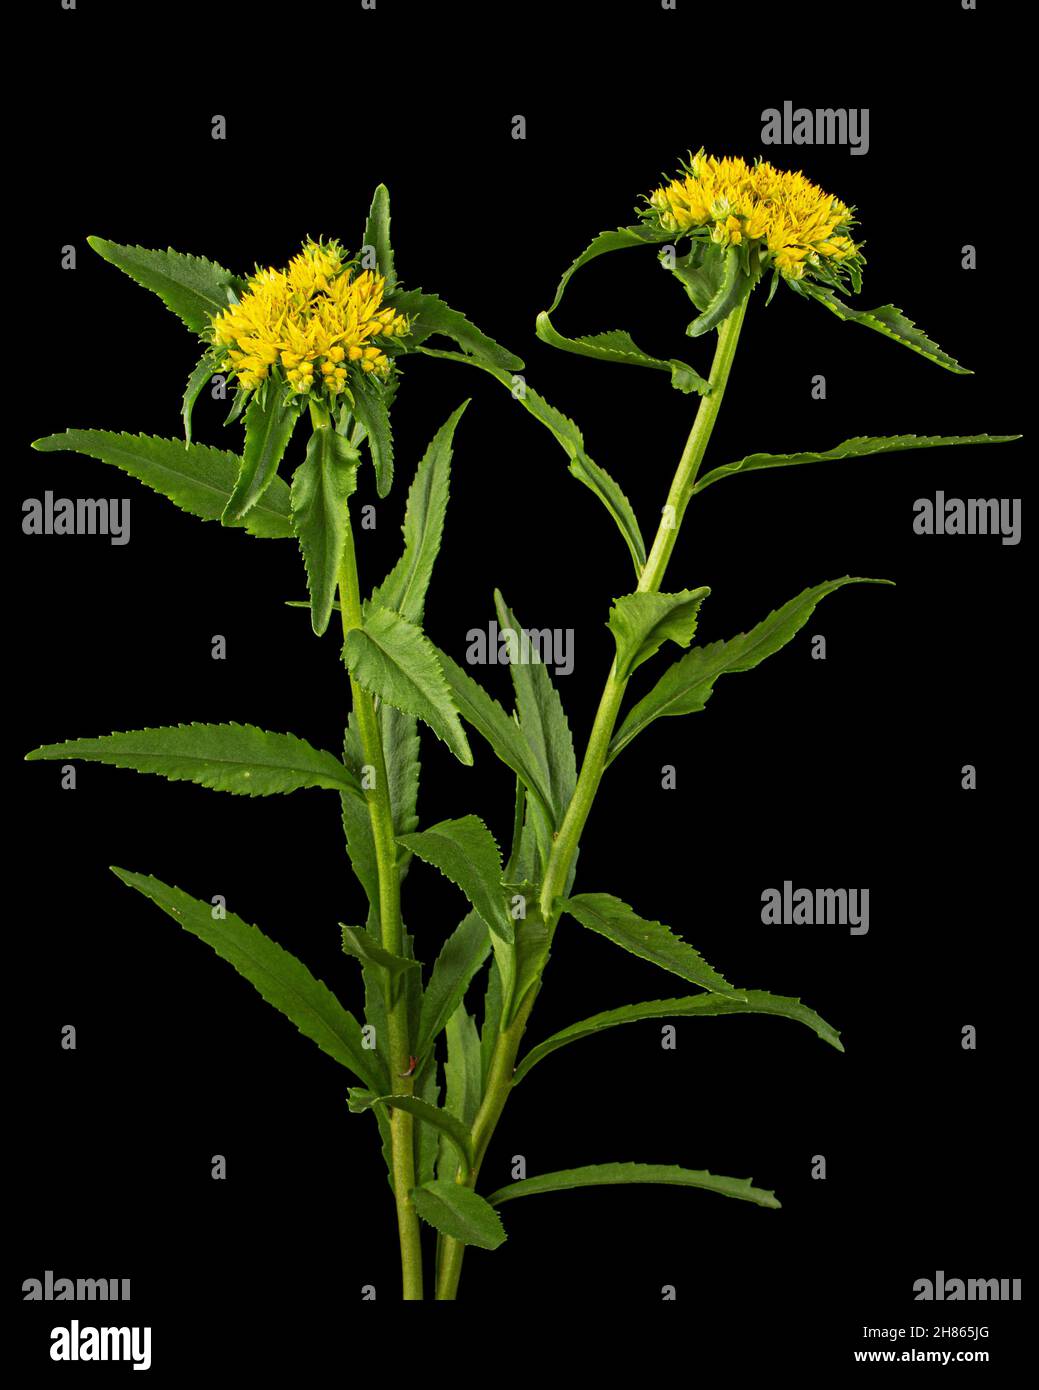 Inflorescence of yellow rhodiola rosea flowers, isolated on black background Stock Photo